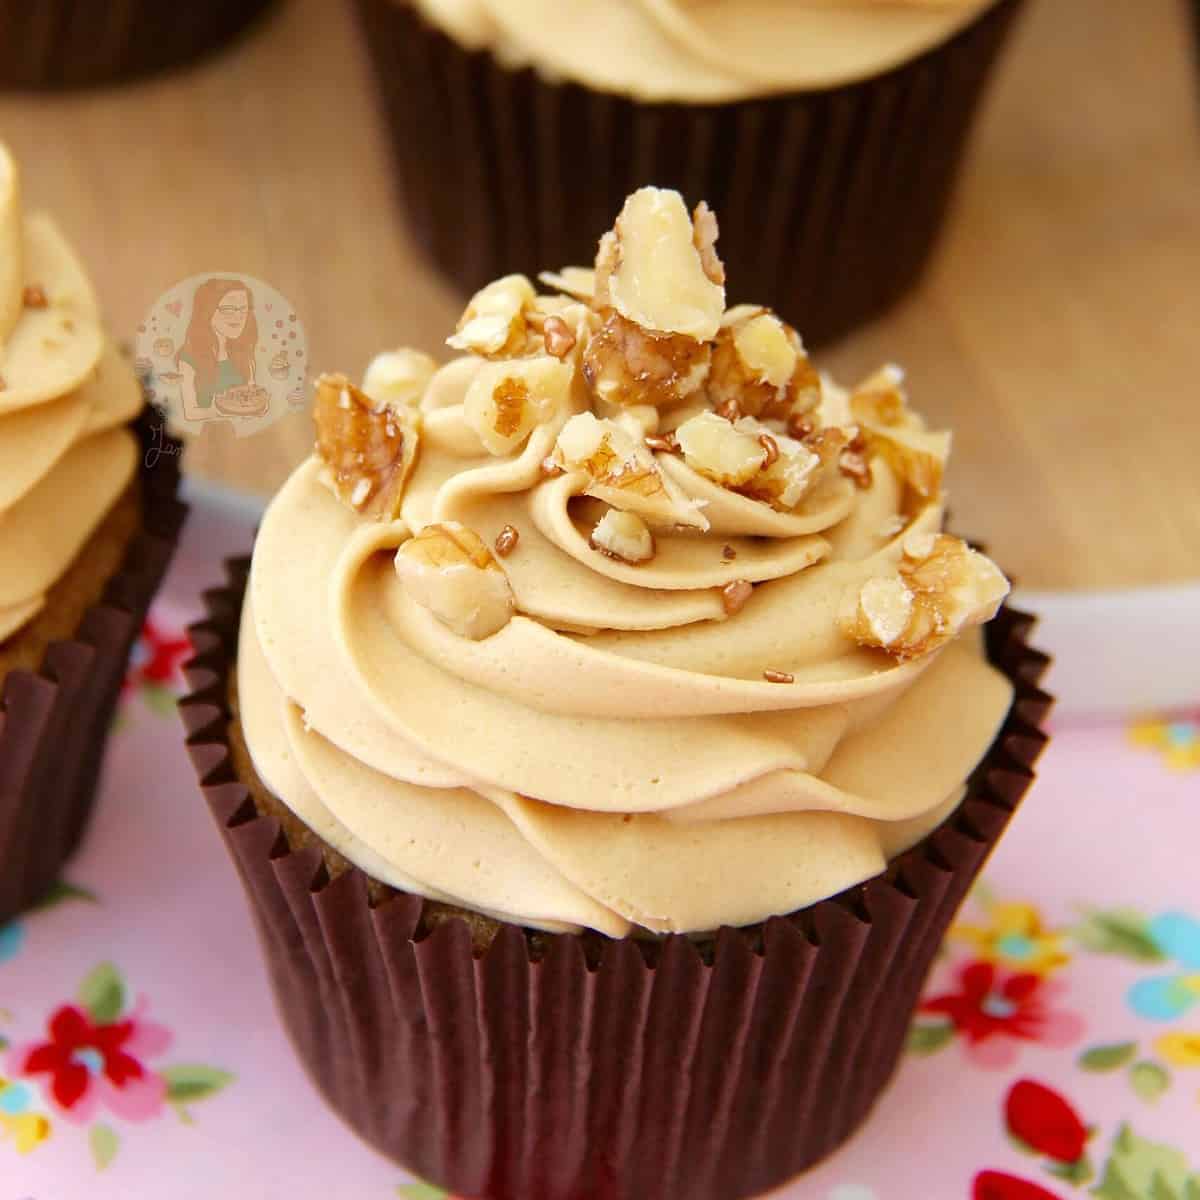  These cupcakes are a perfect treat for coffee and dessert lovers!